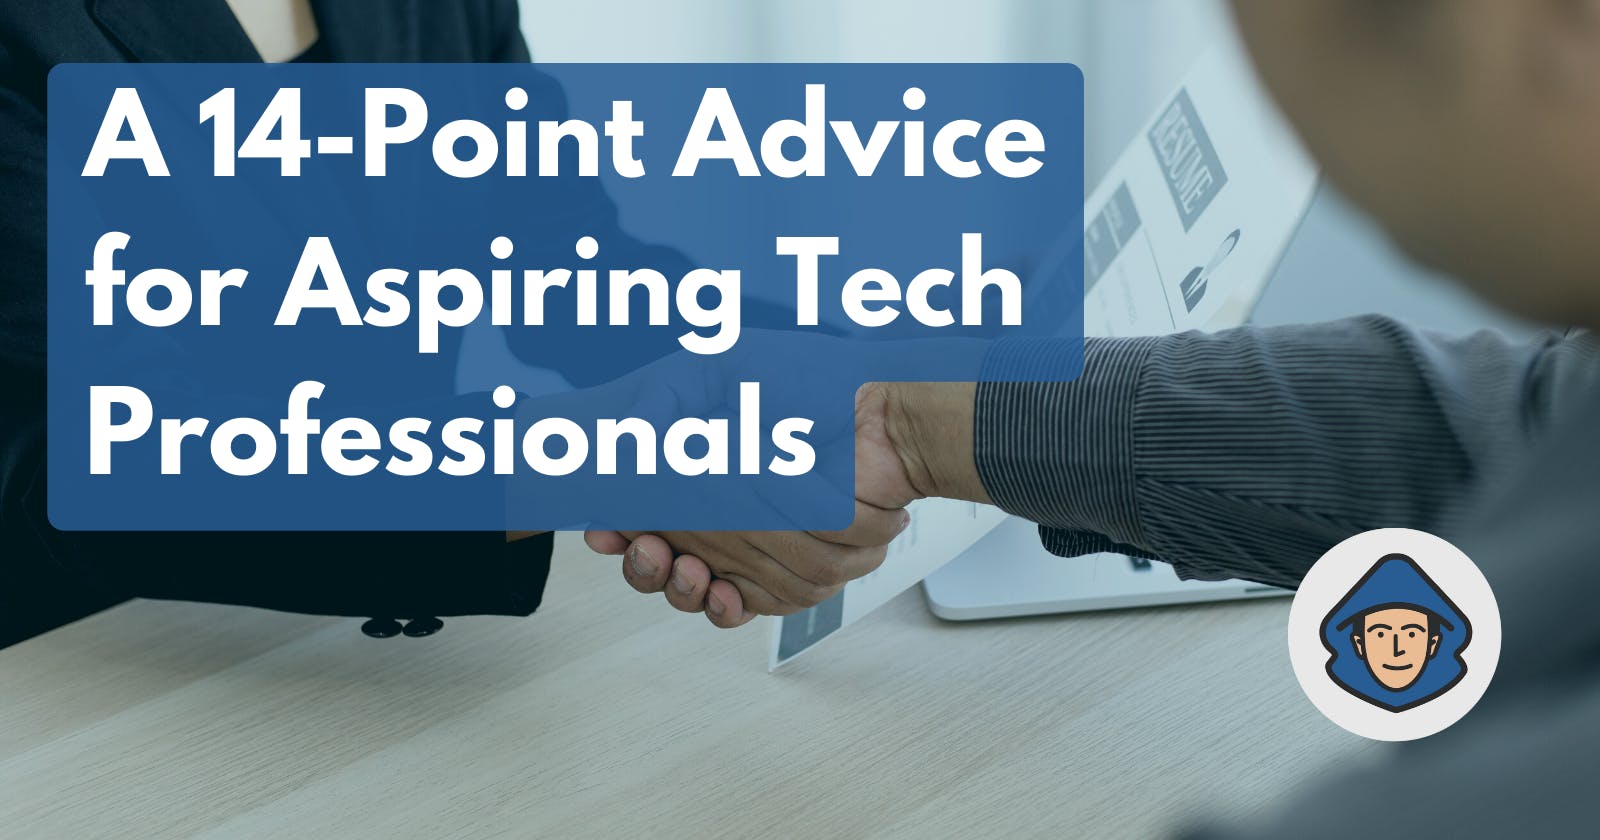 A 14-Point Advice for Aspiring Tech Professionals